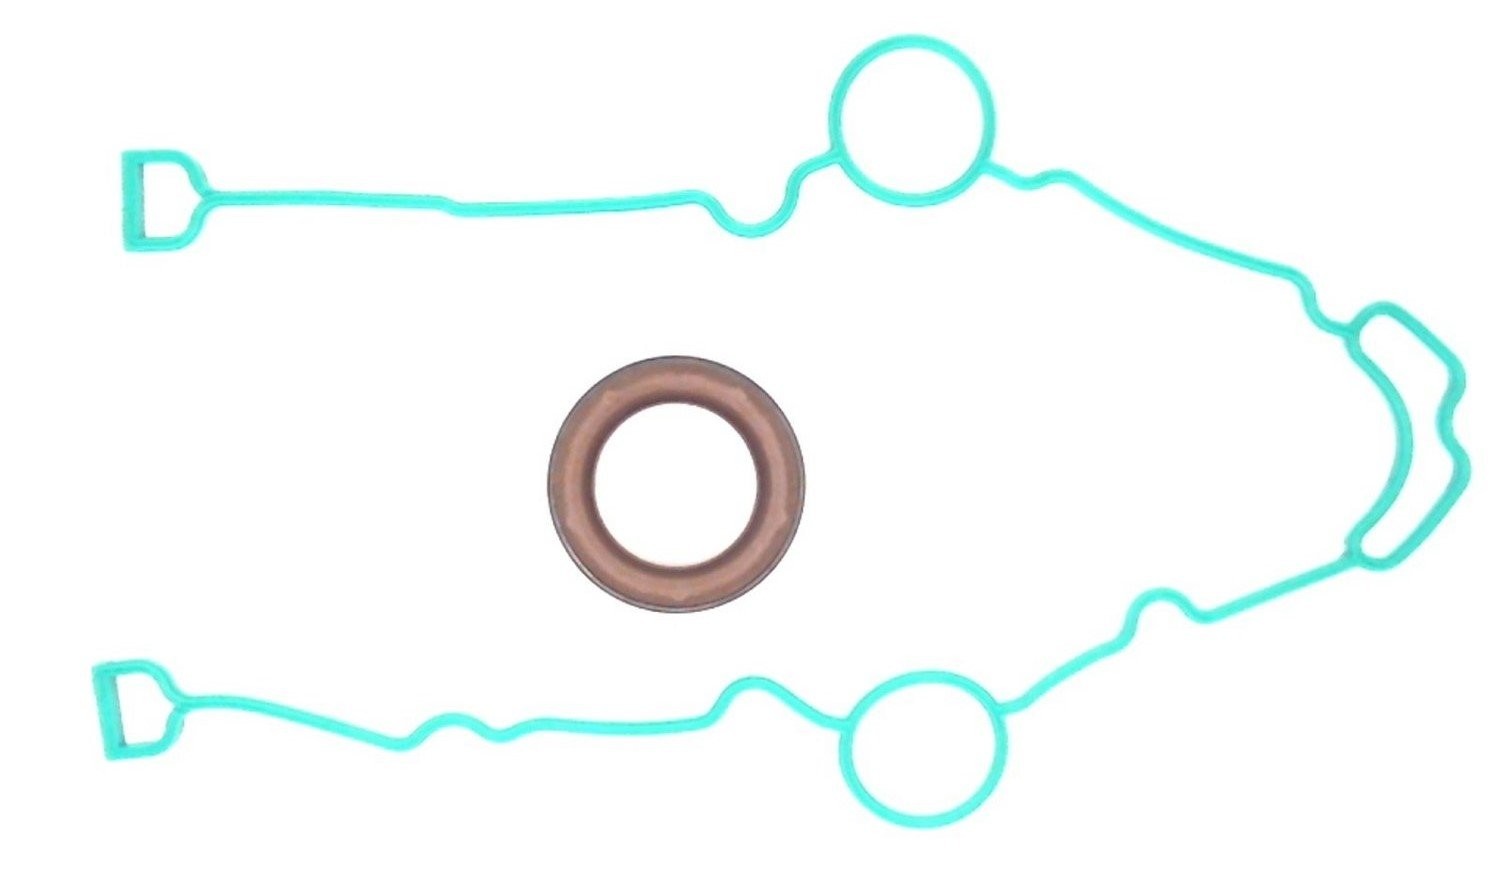 Timing Cover Gasket Set: Suit 5.7 Hemi 2005 - 2020 (See listing for applications)